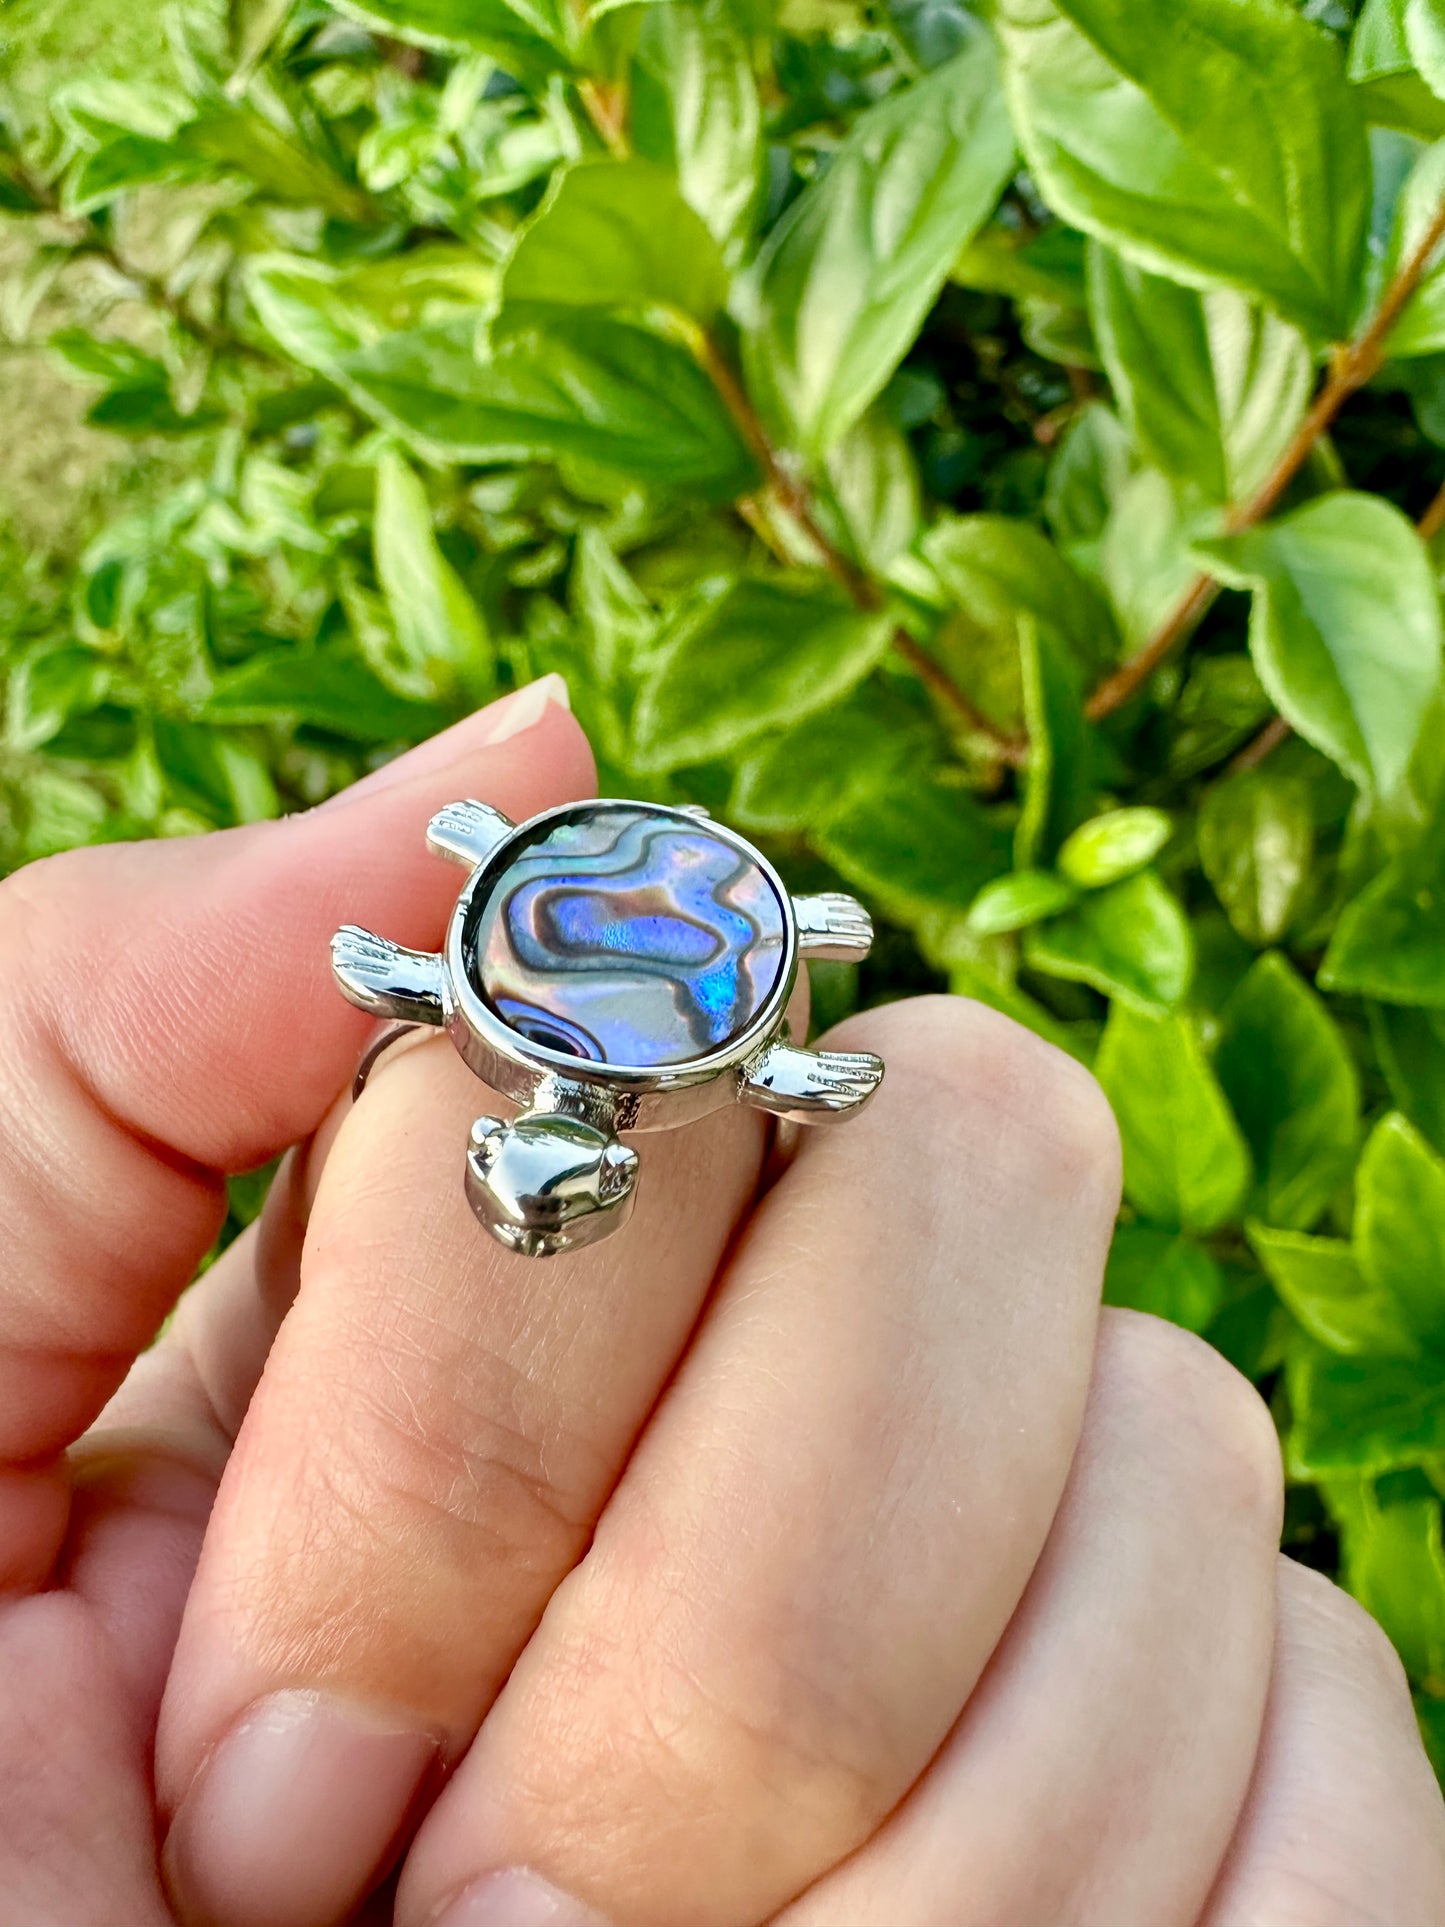 Colorful Abalone Shell Turtle Ring - Adjustable Natural Stone , Unique Artisan Crafted Jewelry